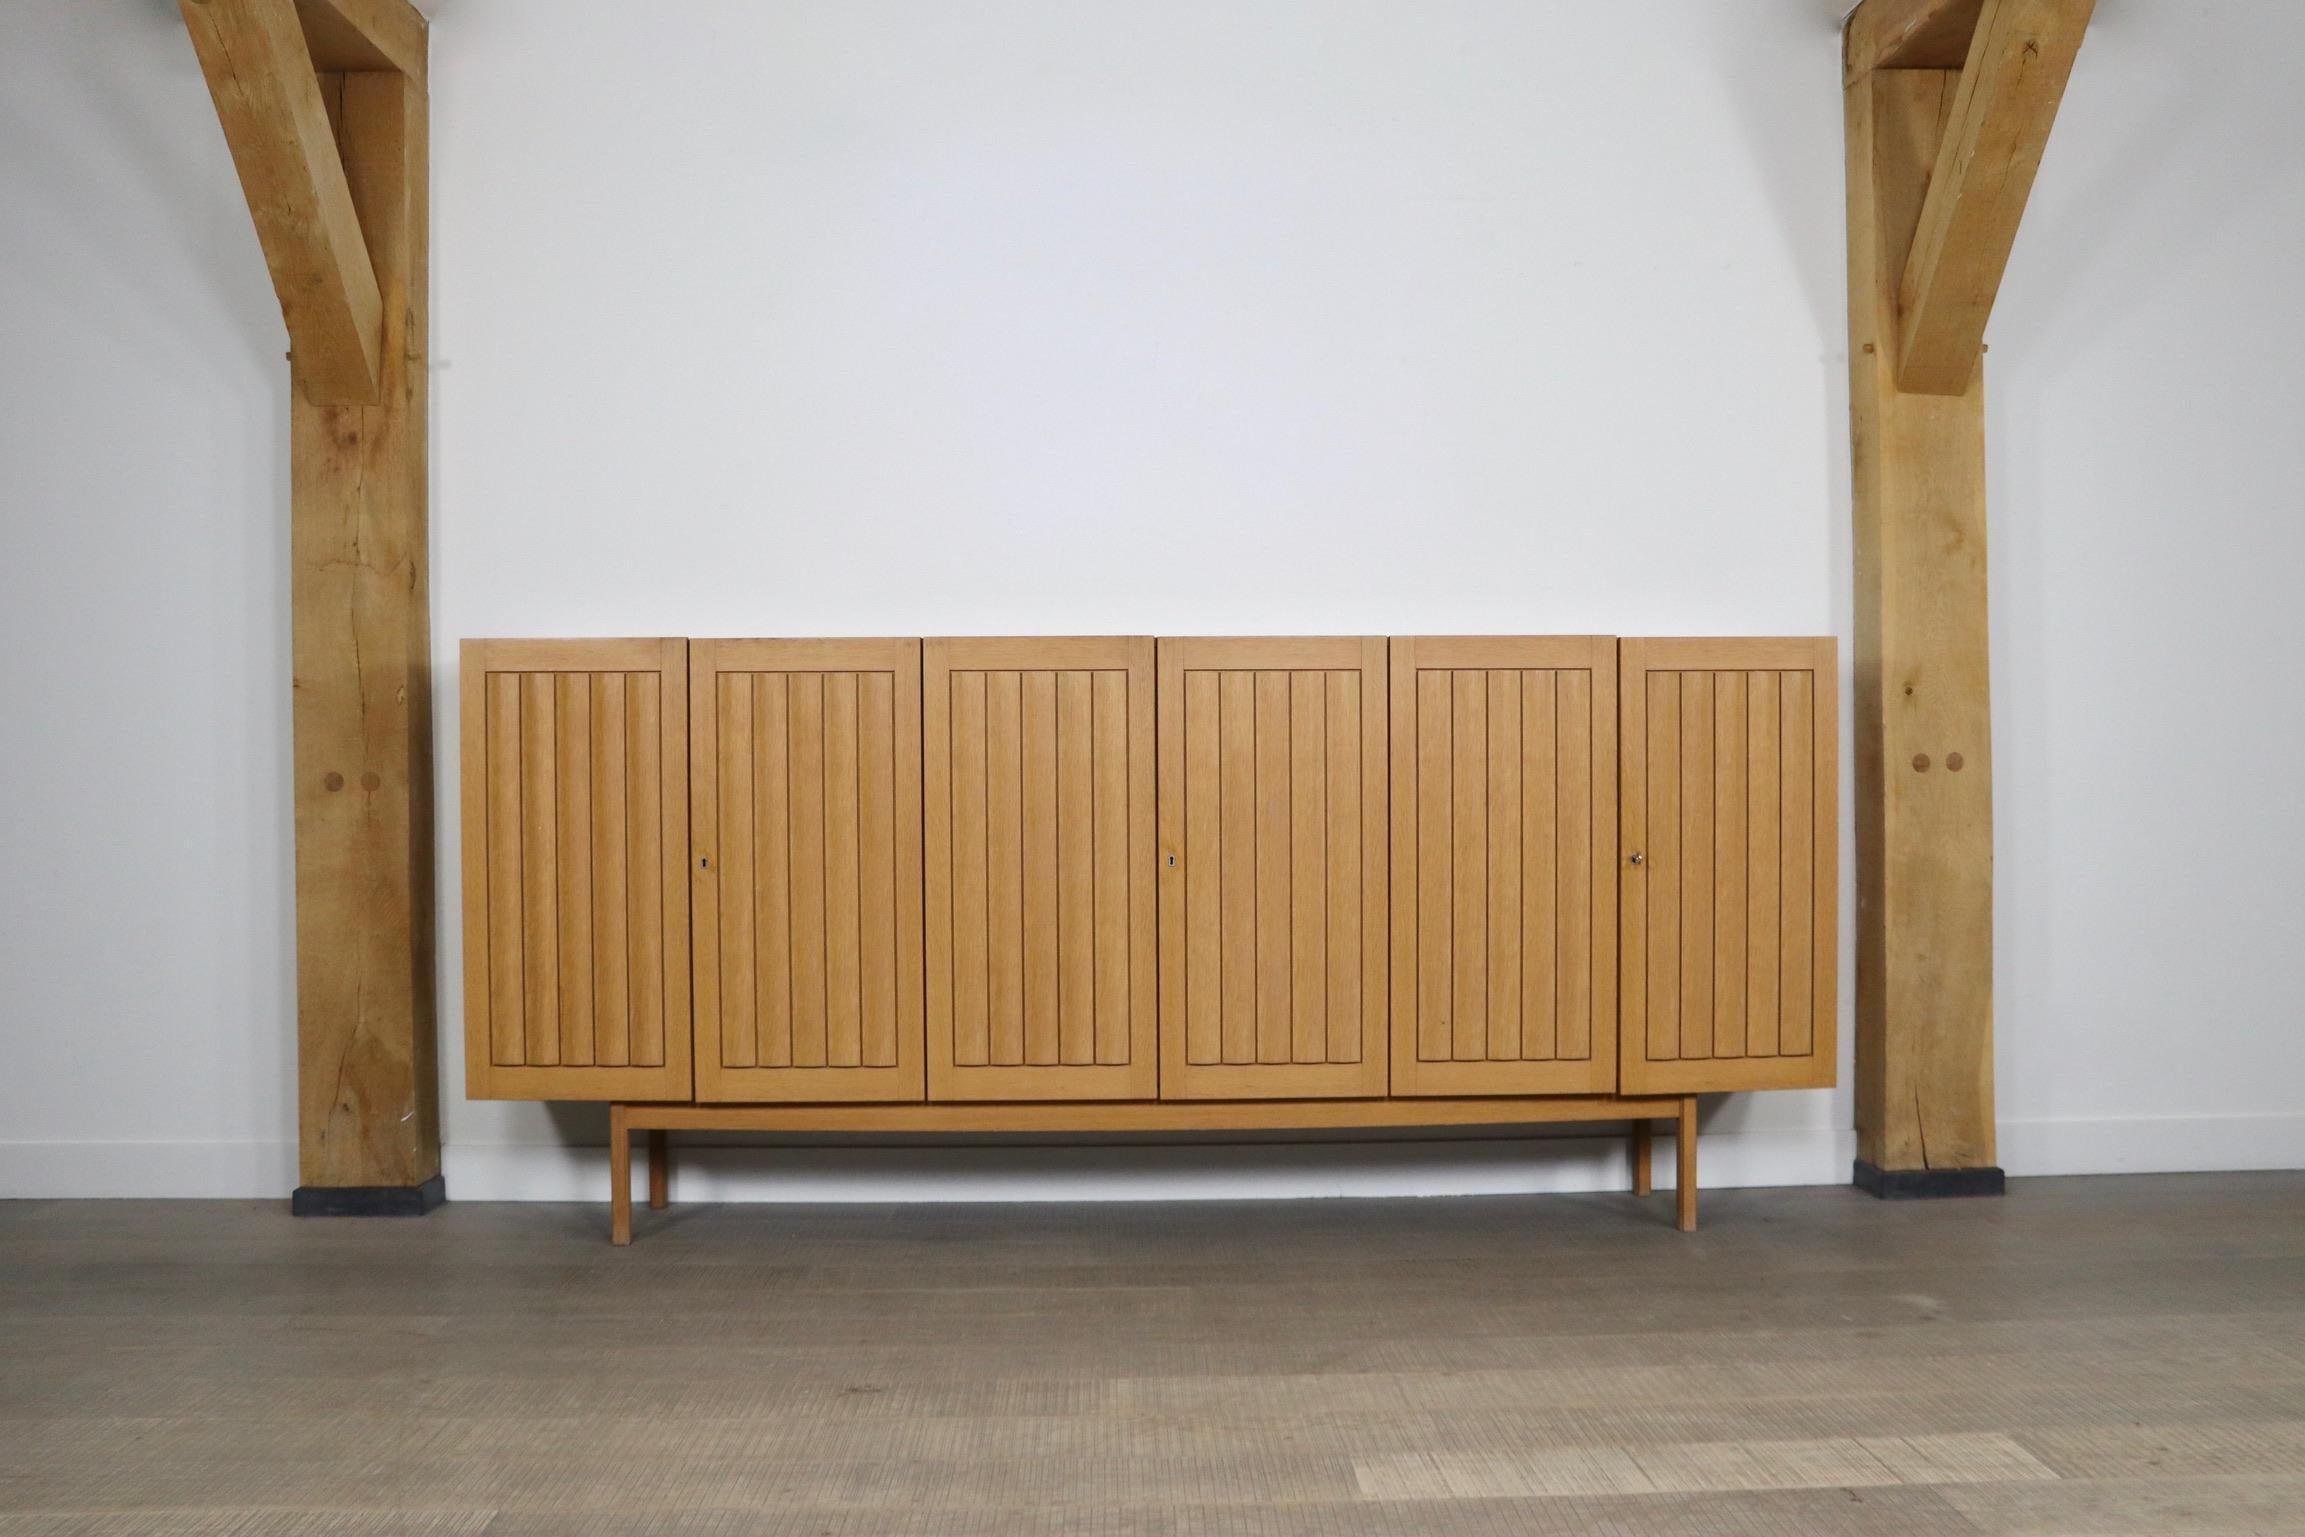 Large vintage highboard in oak by WK Möbel 1960s. With 6 opening doors, 6 shelves and two drawers, this highboard can store a lot! The stunning light oak will fit into any space, bringing warmth and maintaining the calmth. 

Dimensions: W270 x D45